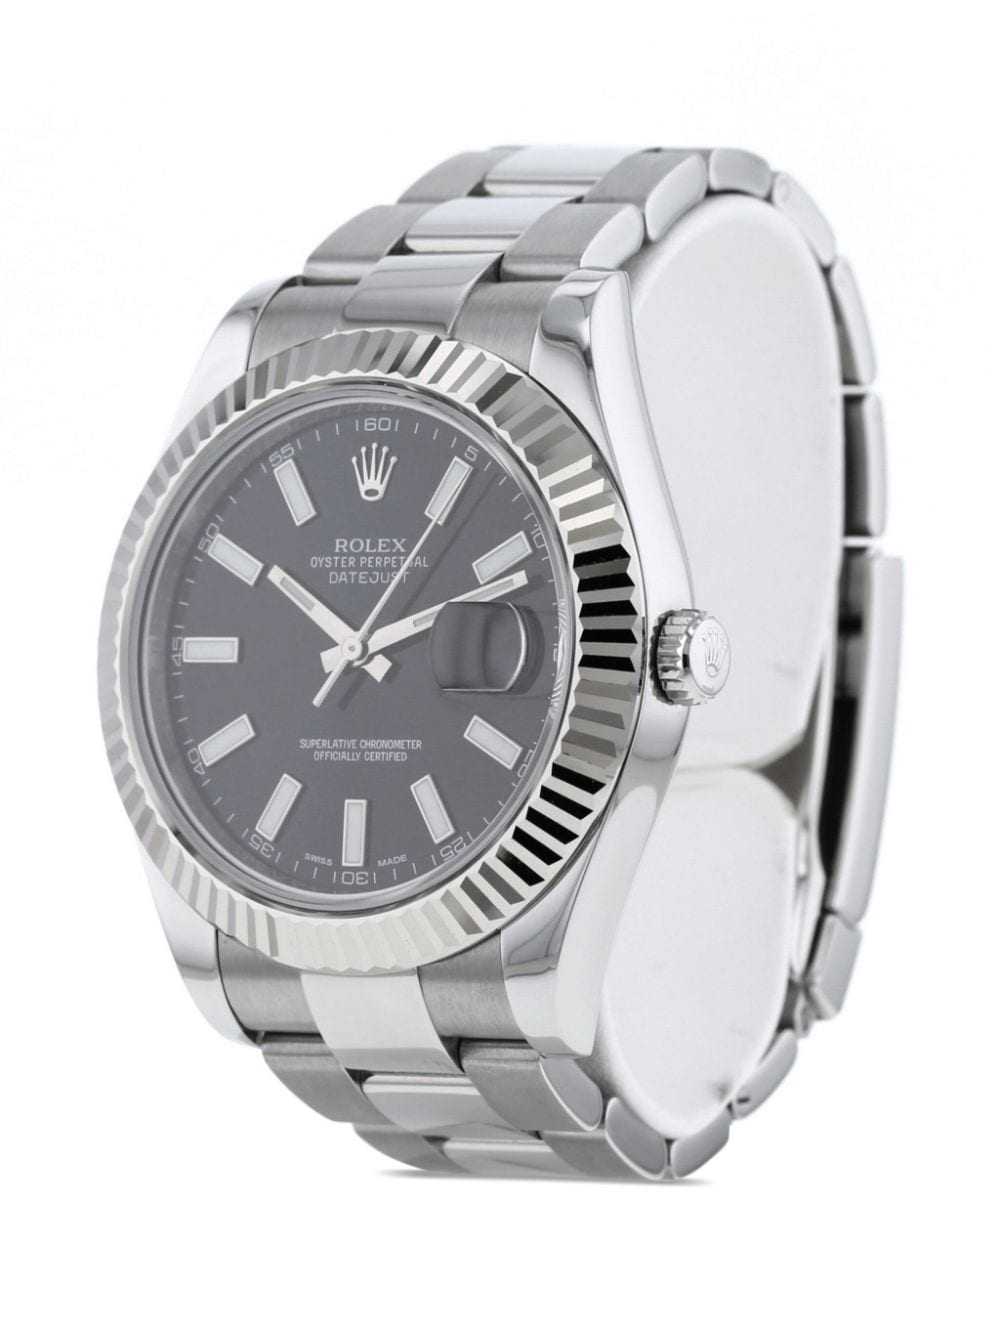 Rolex 2013 pre-owned Datejust 41mm - Black - image 2